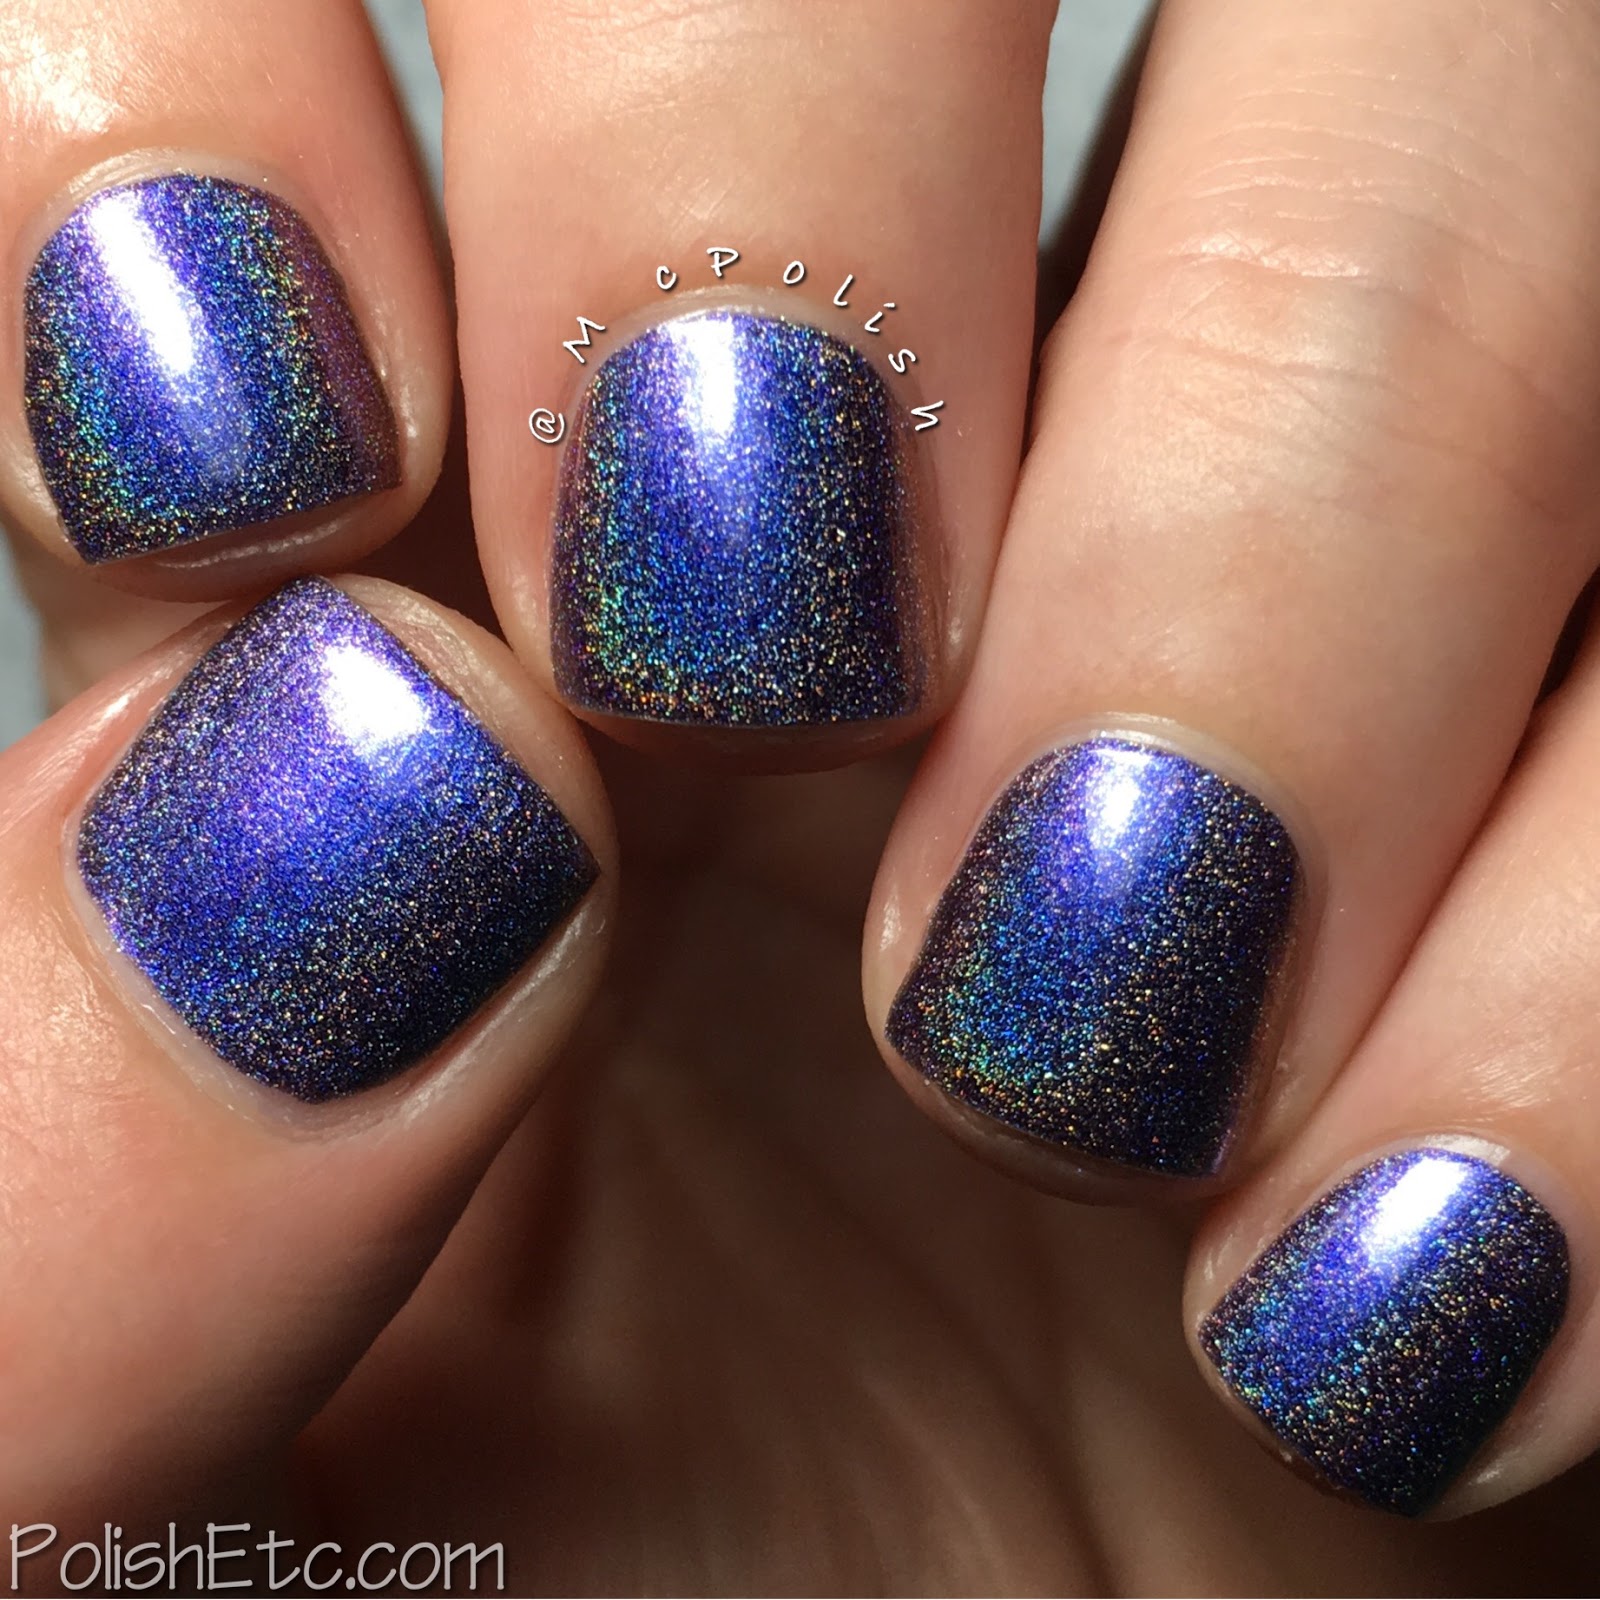 Great Lakes Lacquer - Polishing Poetic Collection - McPolish - Ease One Life the Aching